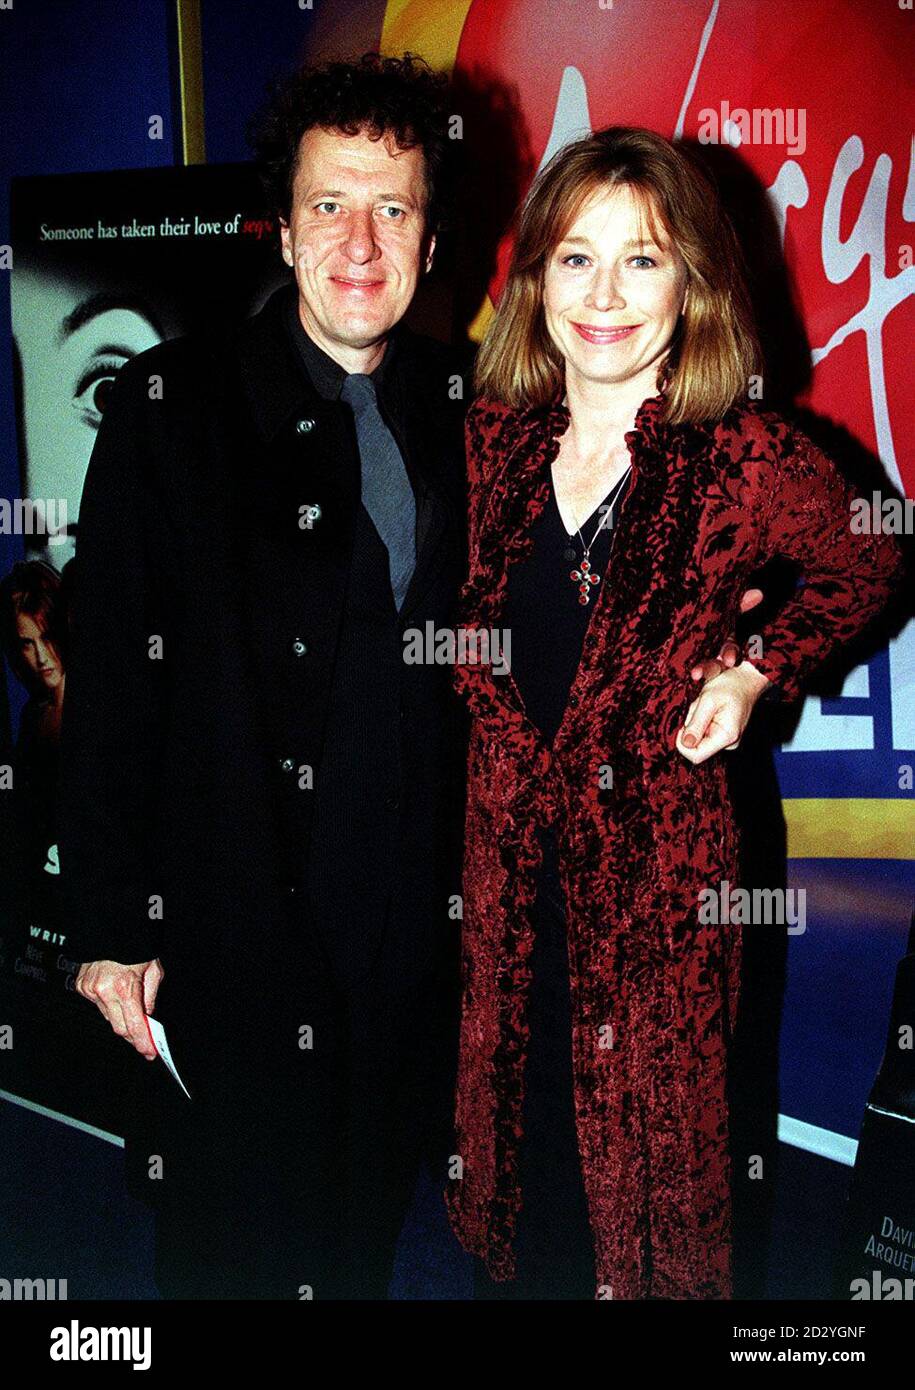 PA NEWS PHOTO 3/4/98 AUSTRALIAN ACTOR GEOFFREY RUSH AND HIS ACTRESS WIFE, JANE MENELAUS, ATTEND THE FILM PREMIERE OF 'SCREAM 2' AT THE VIRGIN CINEMA, FULHAM ROAD, LONDON Stock Photo